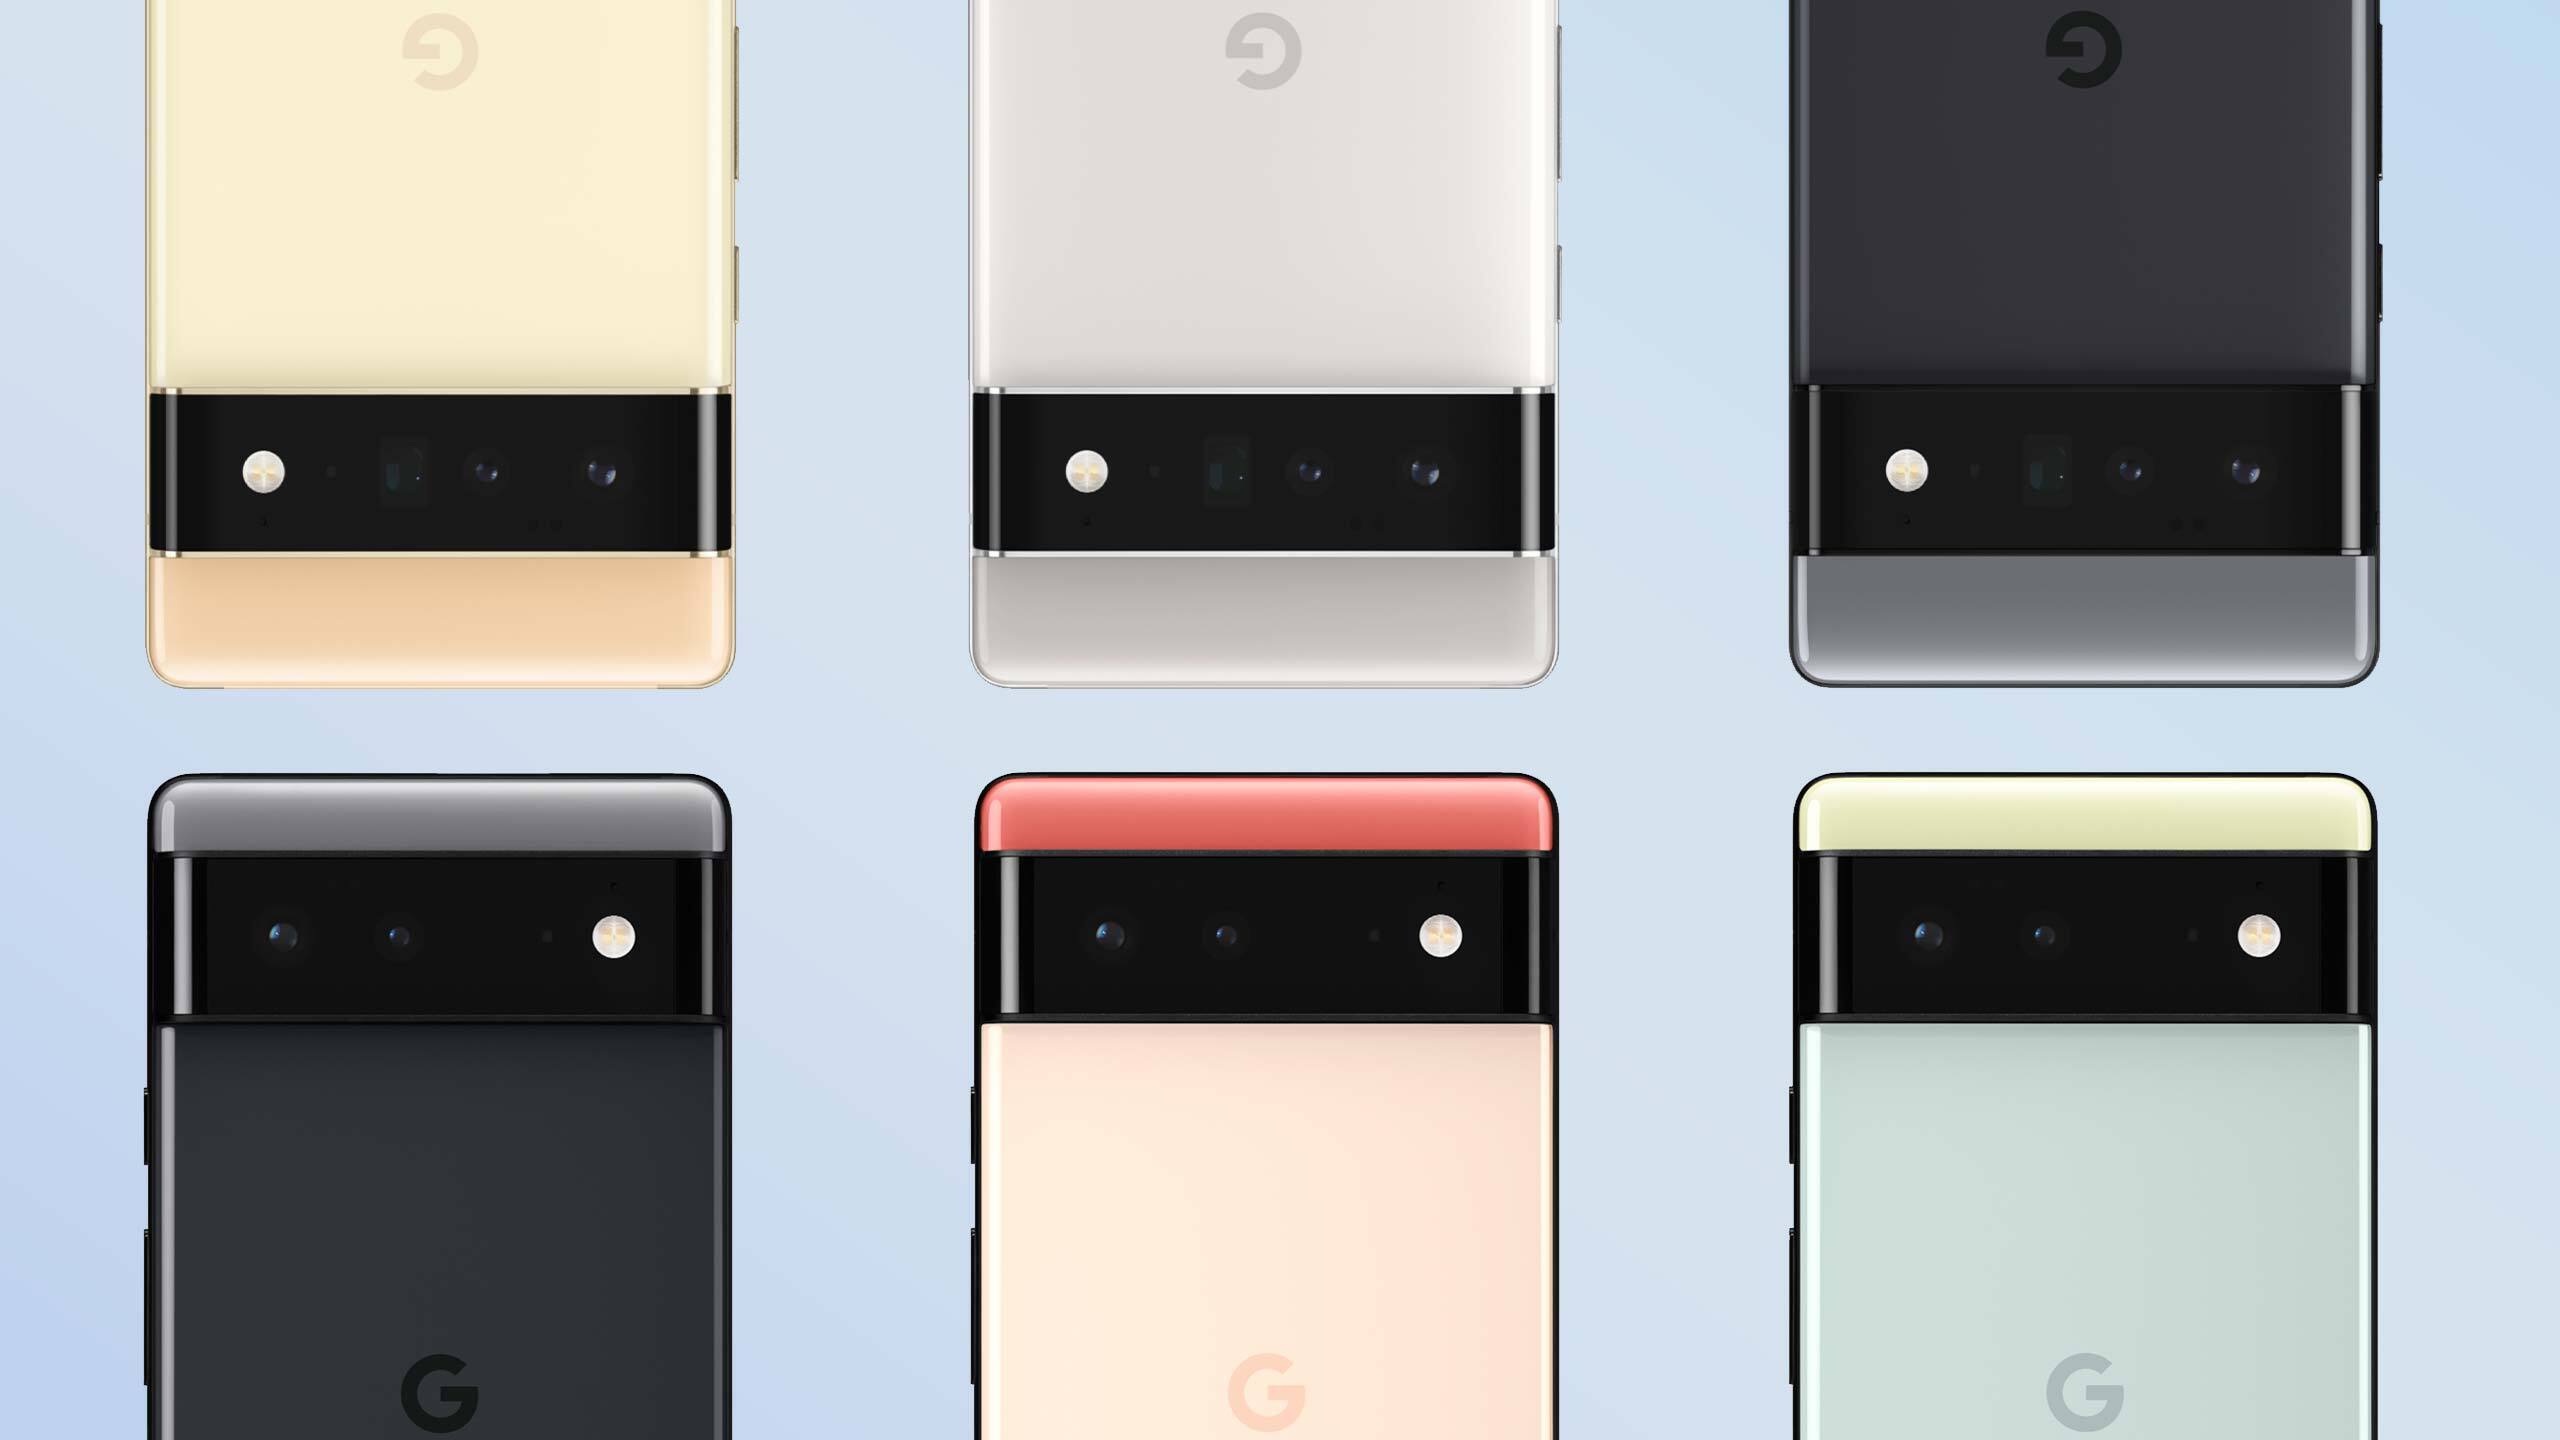 Google was not afraid to be bold with its design for the Pixel family - Have Apple and Samsung grown too complacent? Darkhorse rival steals smartphone design crown in 2023